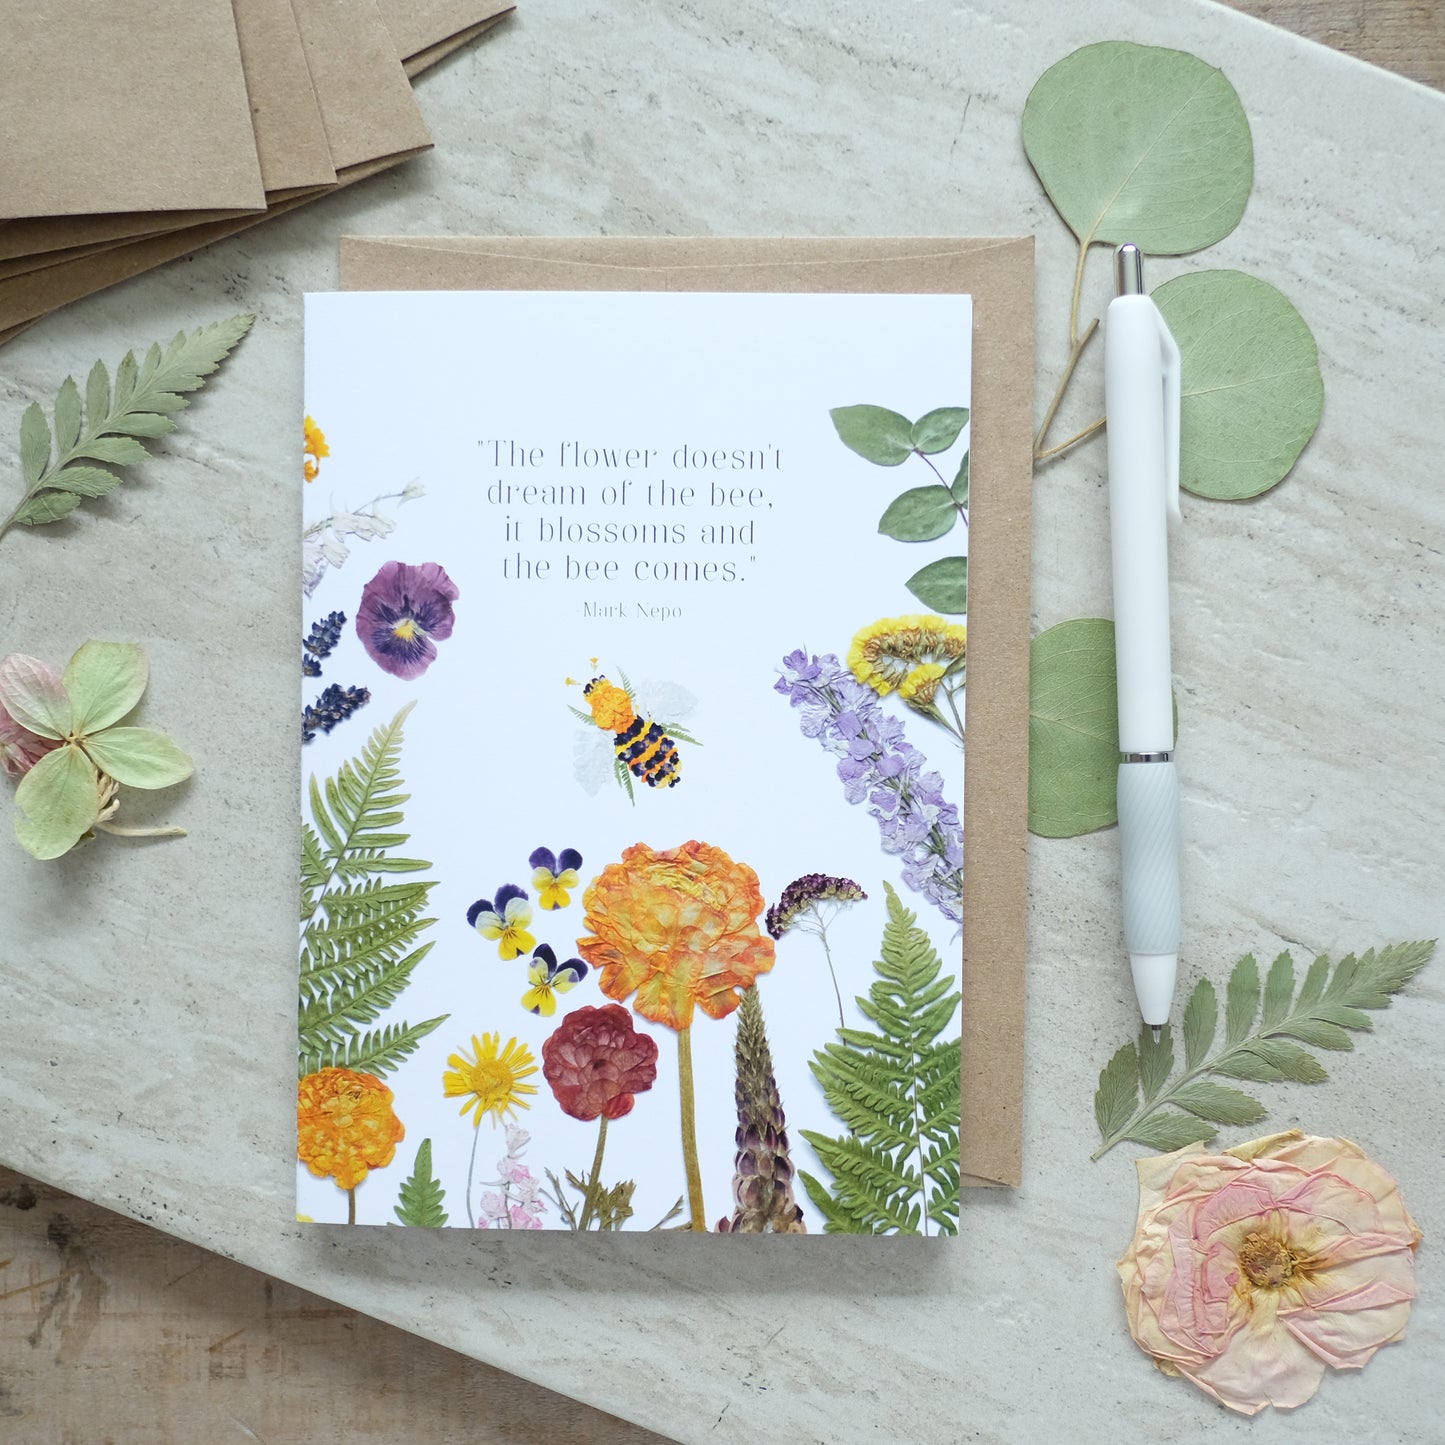 Blossom and The Bee Comes, Everyday Encouragement *Discontinued